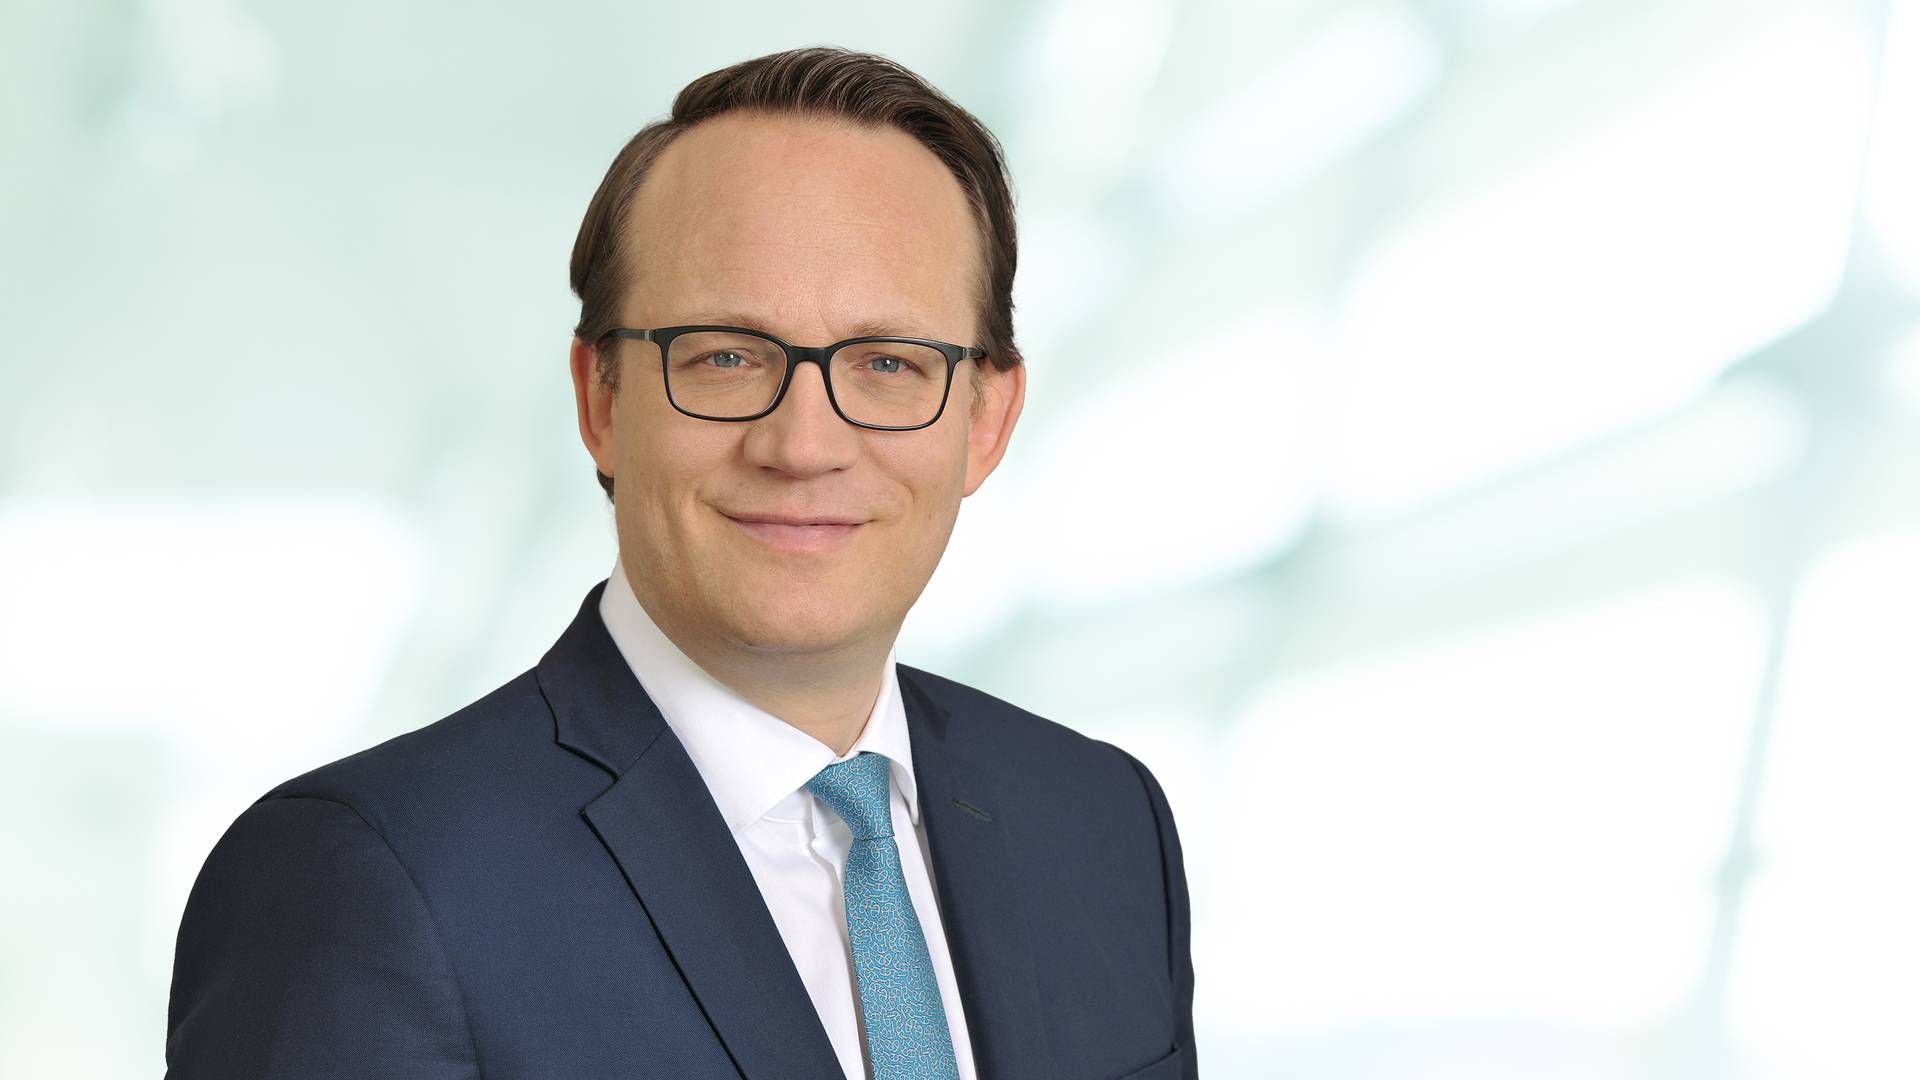 RWE's CEO, Markus Krebber, told the Financial Times that RWE is among the developers that decided not to bid for the contracts. This happened despite the fact that the company won a number of contracts for onshore wind projects and solar energy in the same tender round. | Photo: Rwe